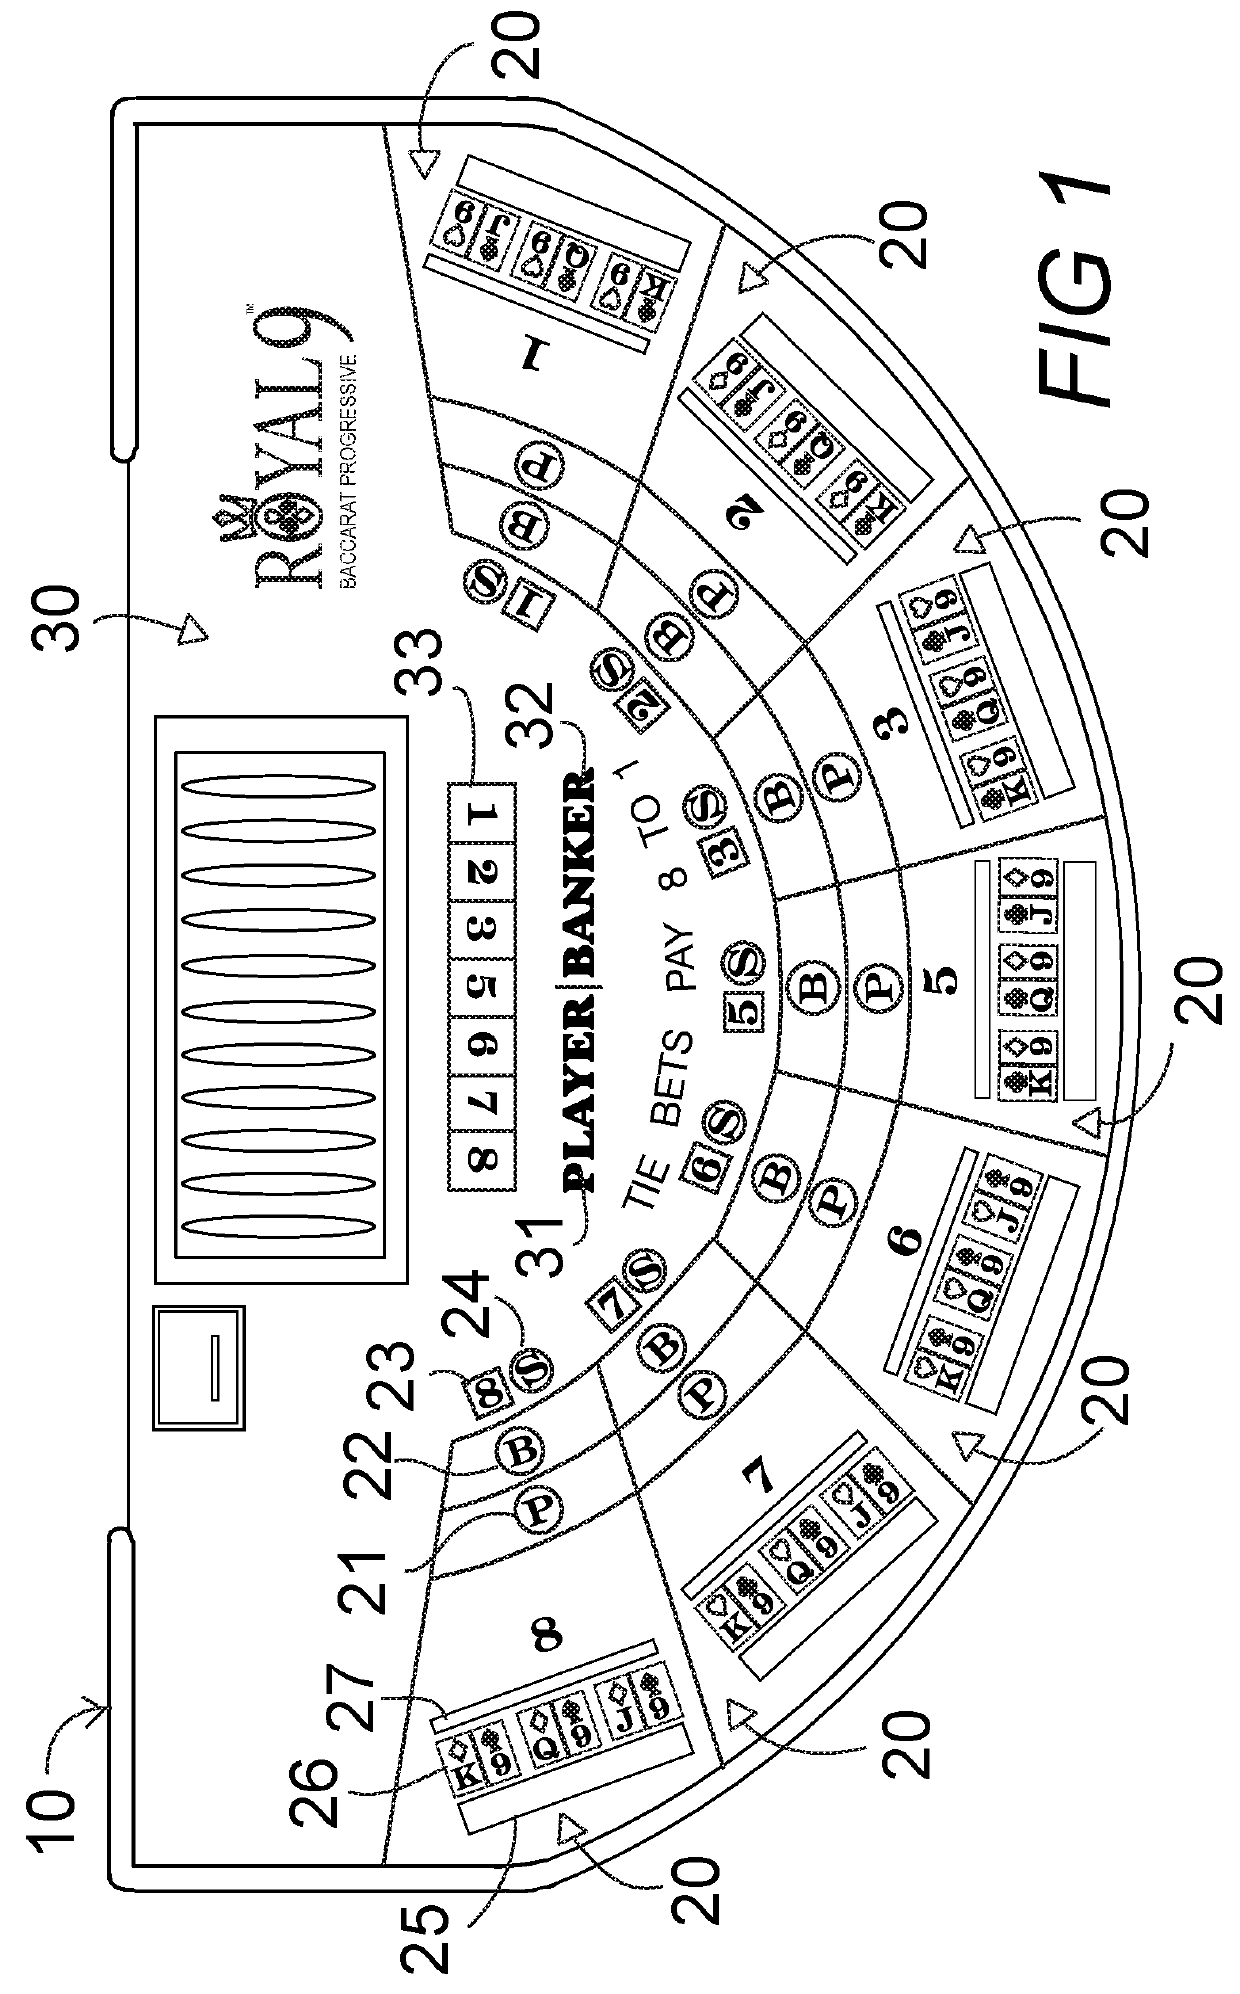 Method of administering casino baccarat with individual player assigned progressive card combination